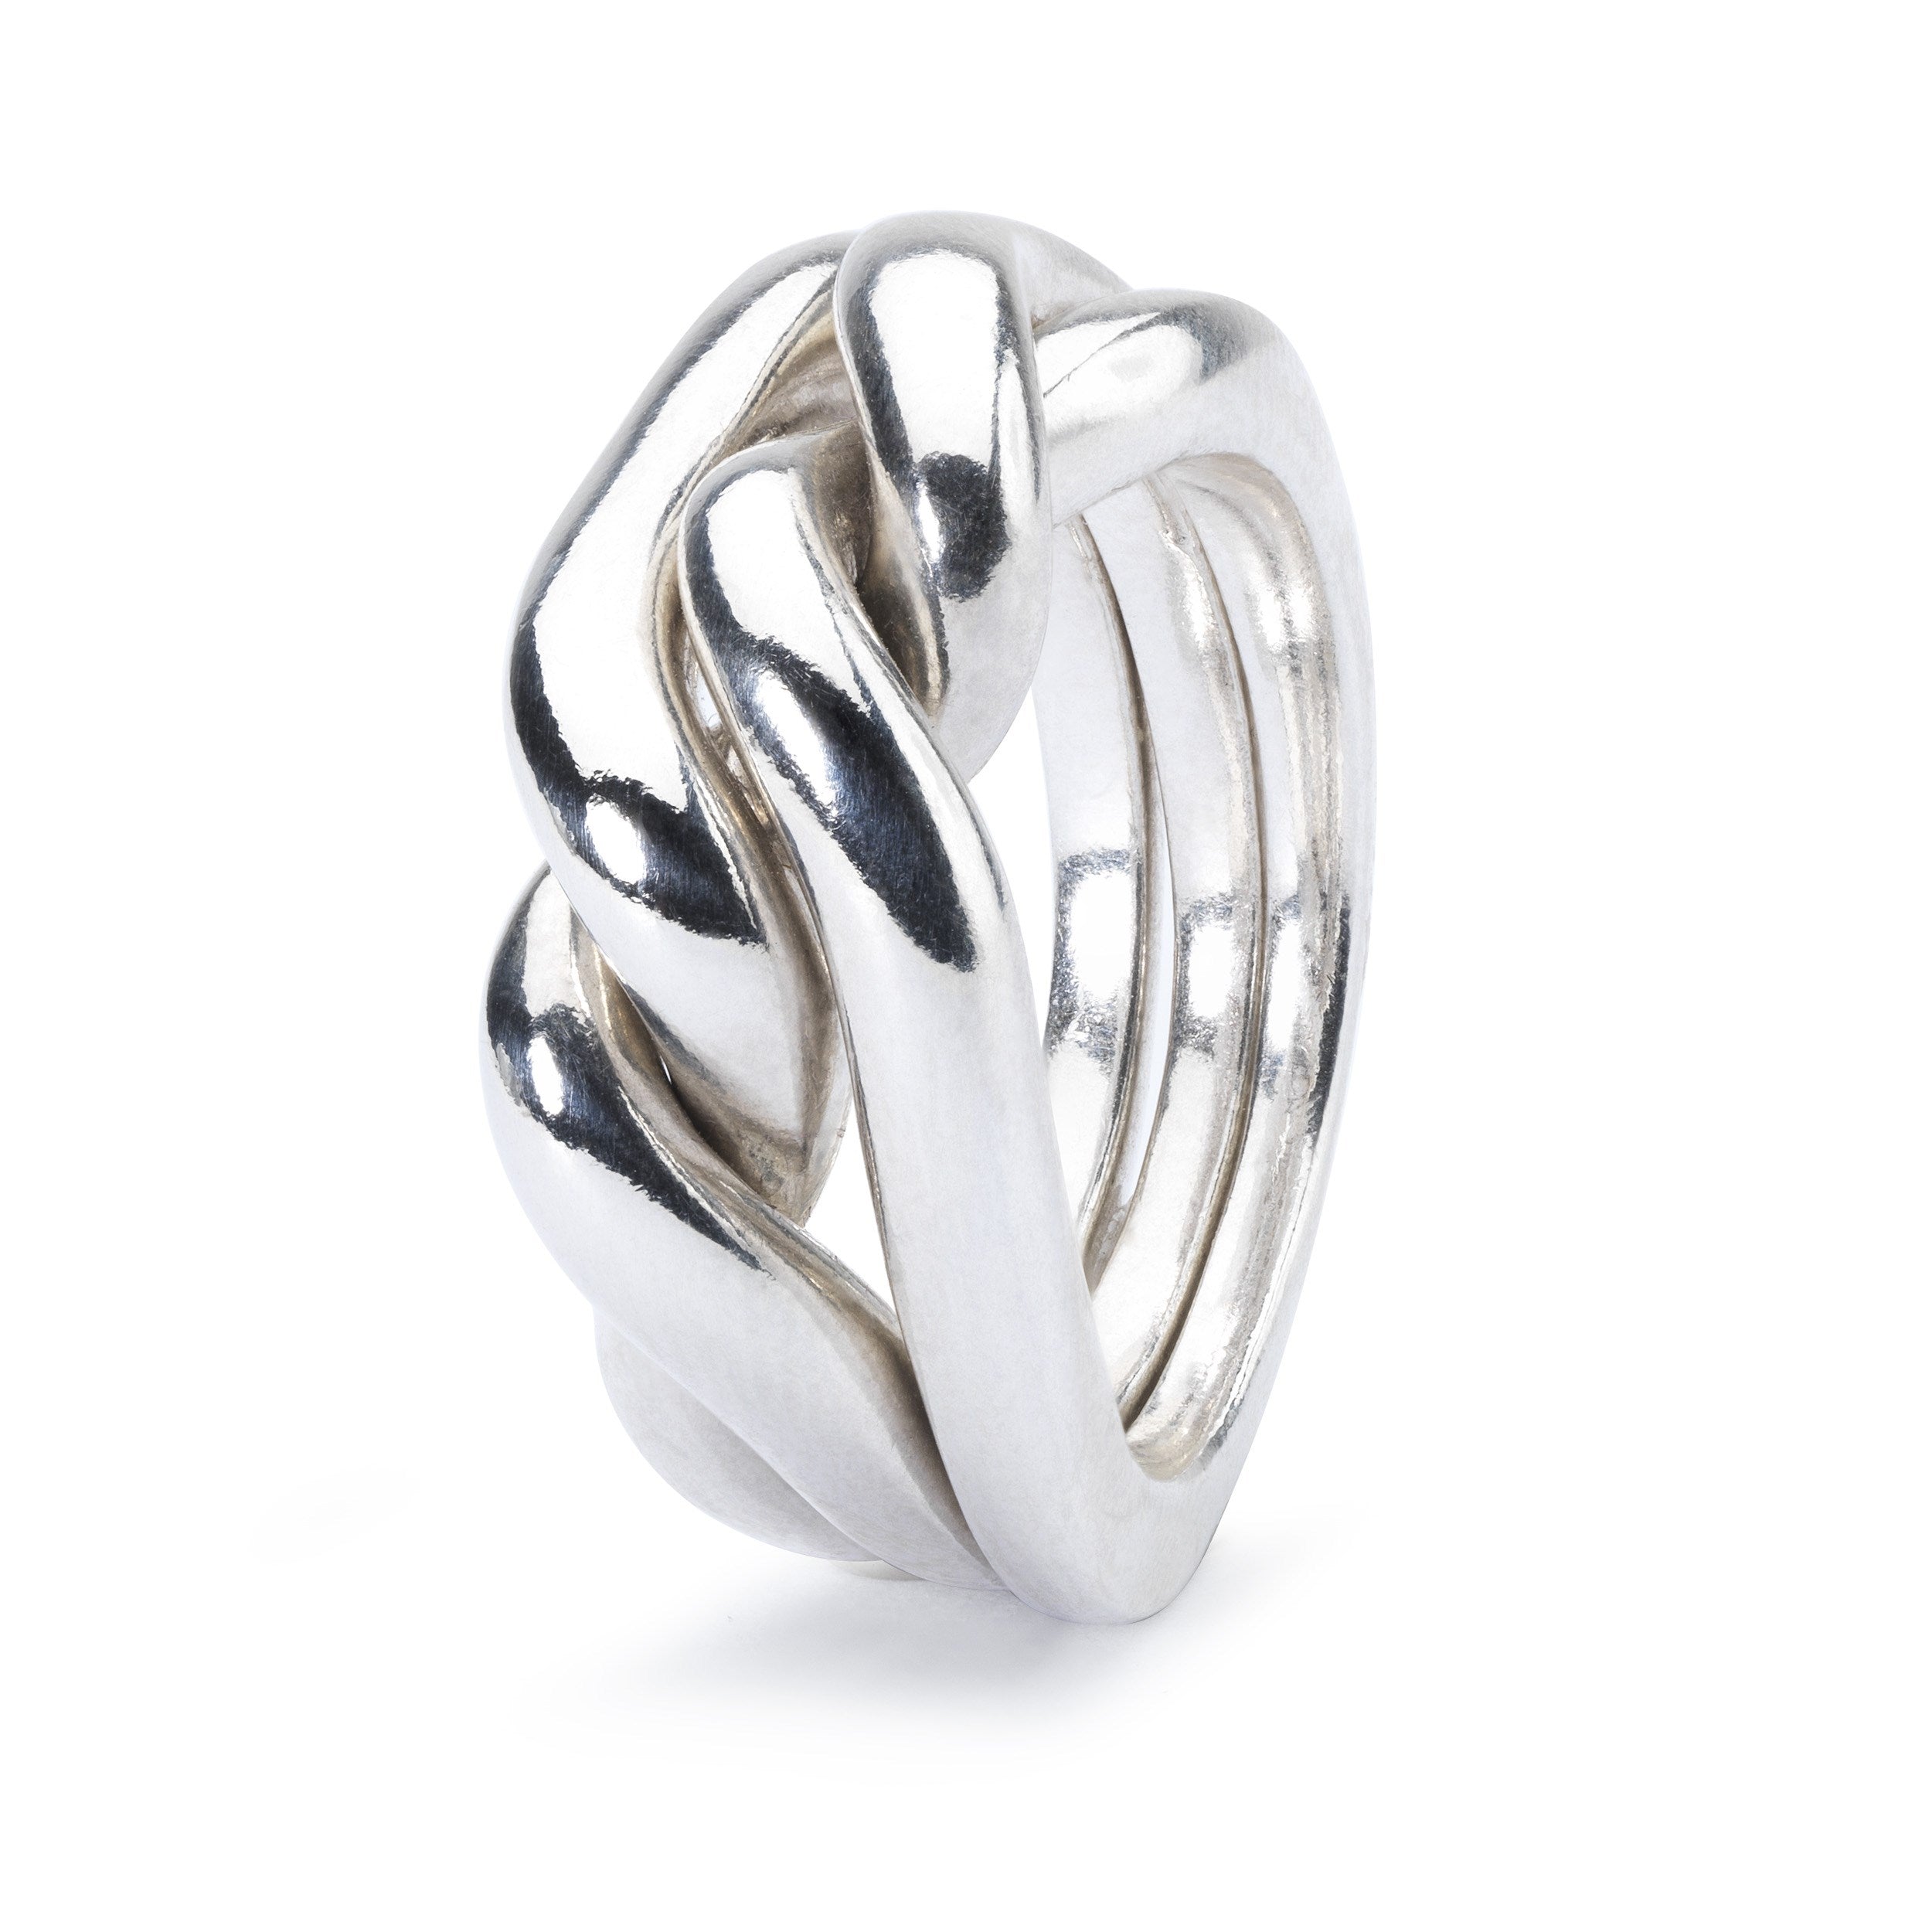 Strength, Courage and Wisdom Ring